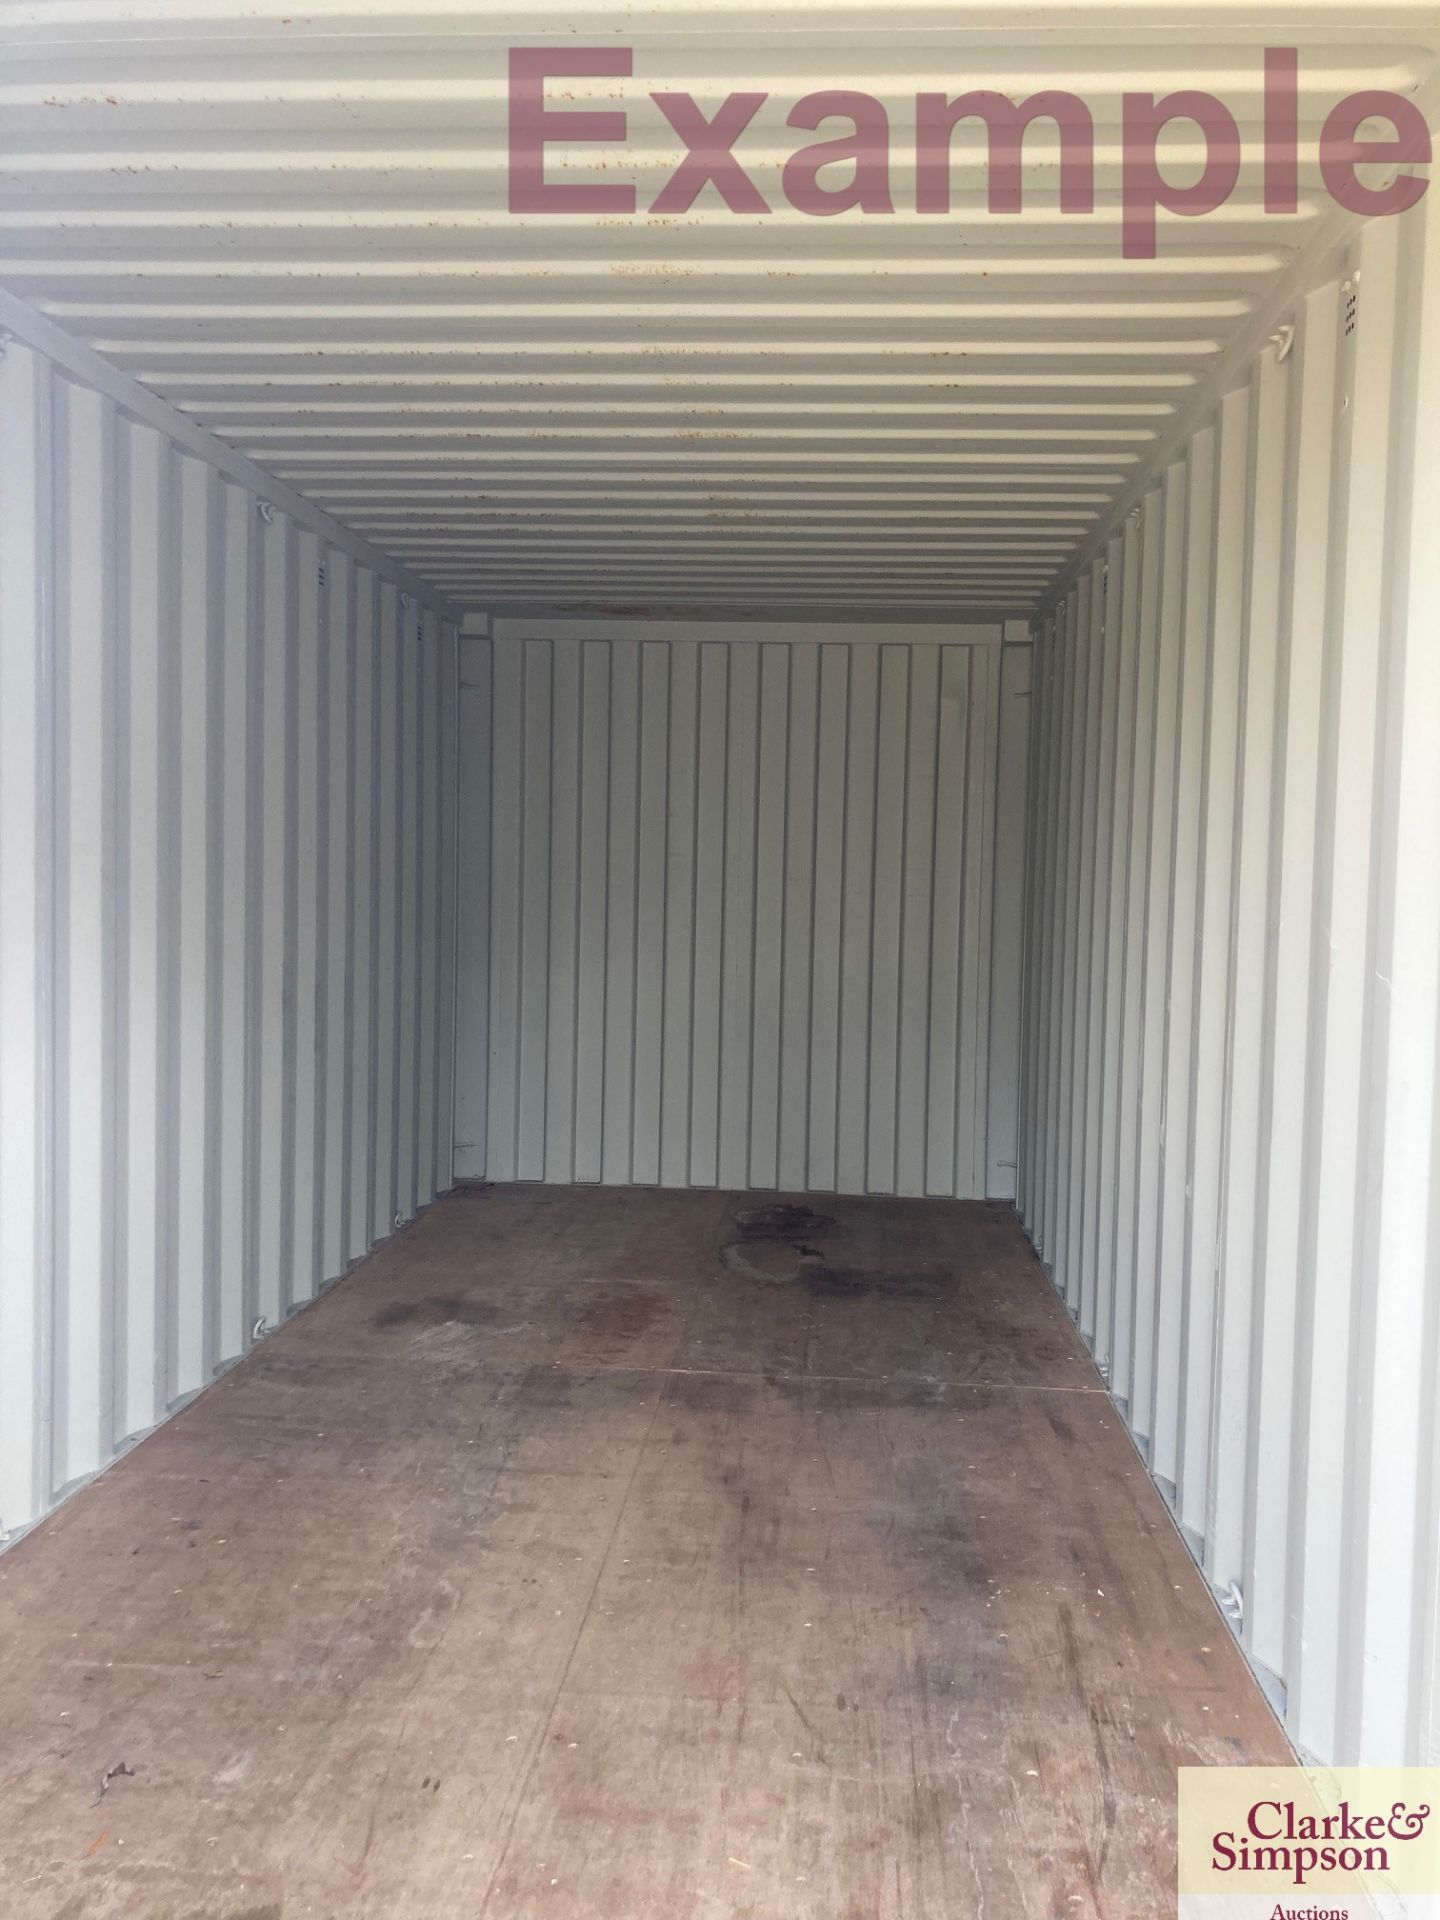 20ft one trip shipping container. Been used as storage. To be sold in situ and removed at - Image 2 of 2